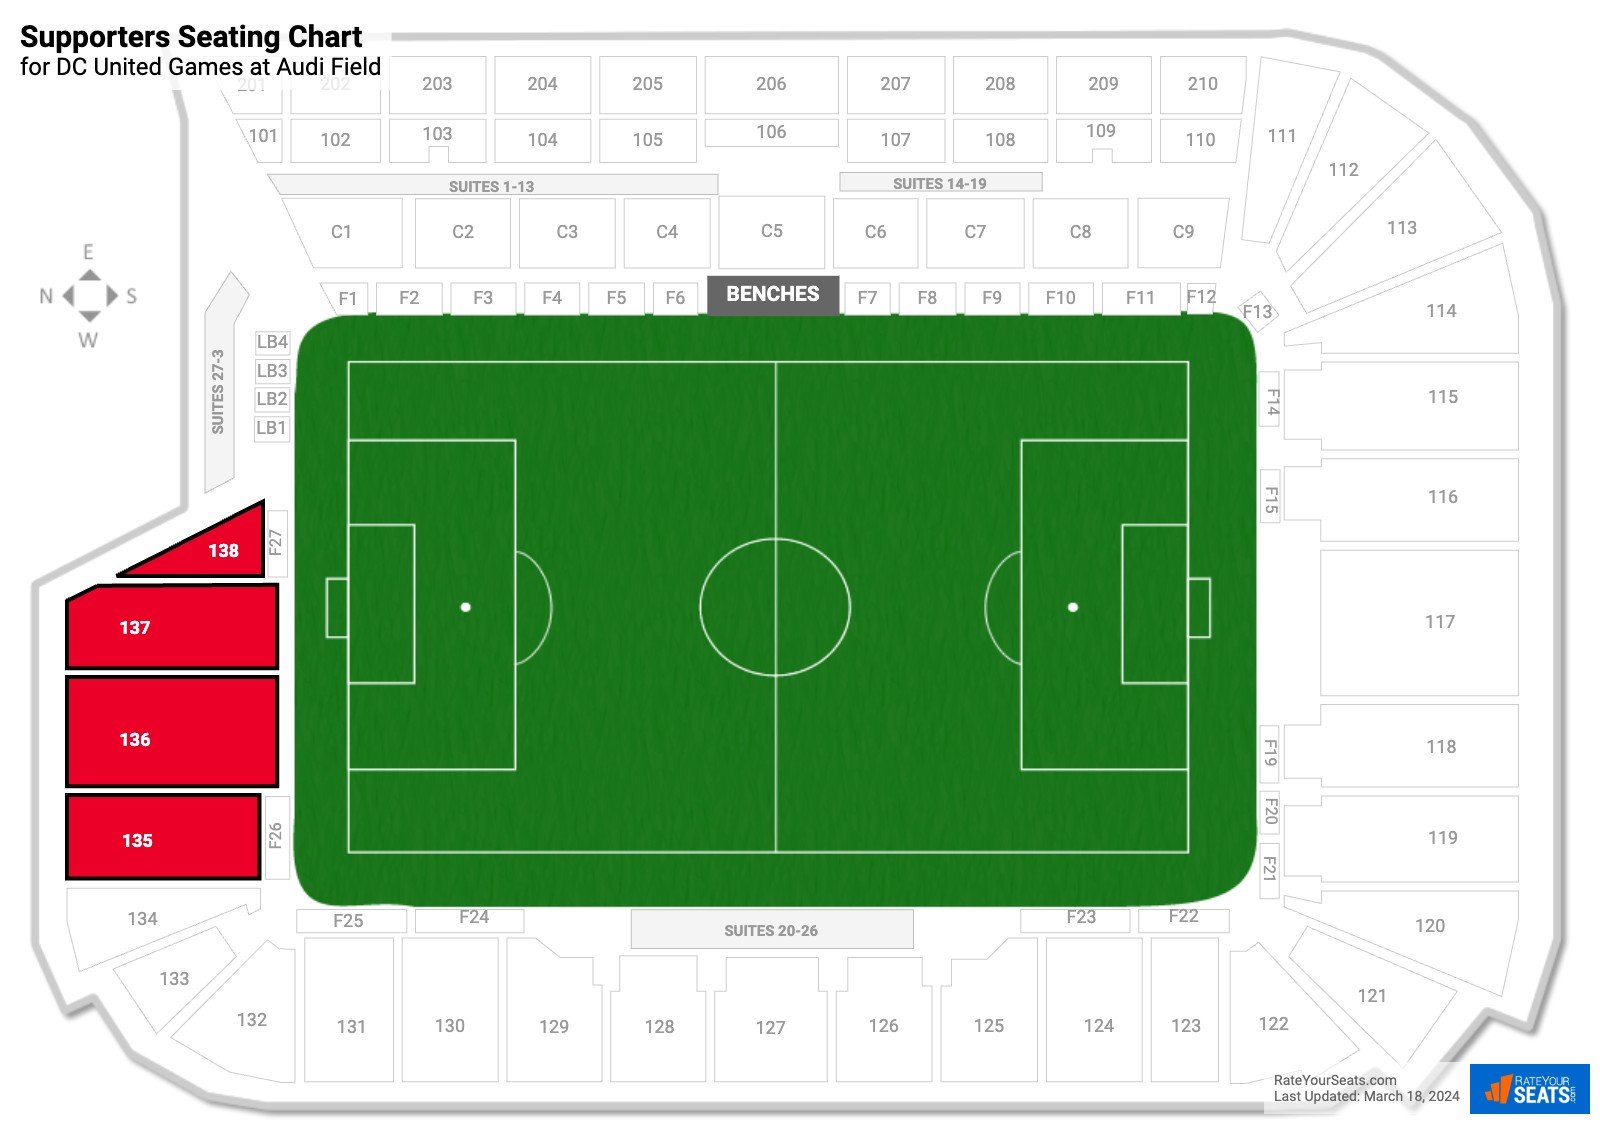 DC United Supporters Seating Chart at Audi Field